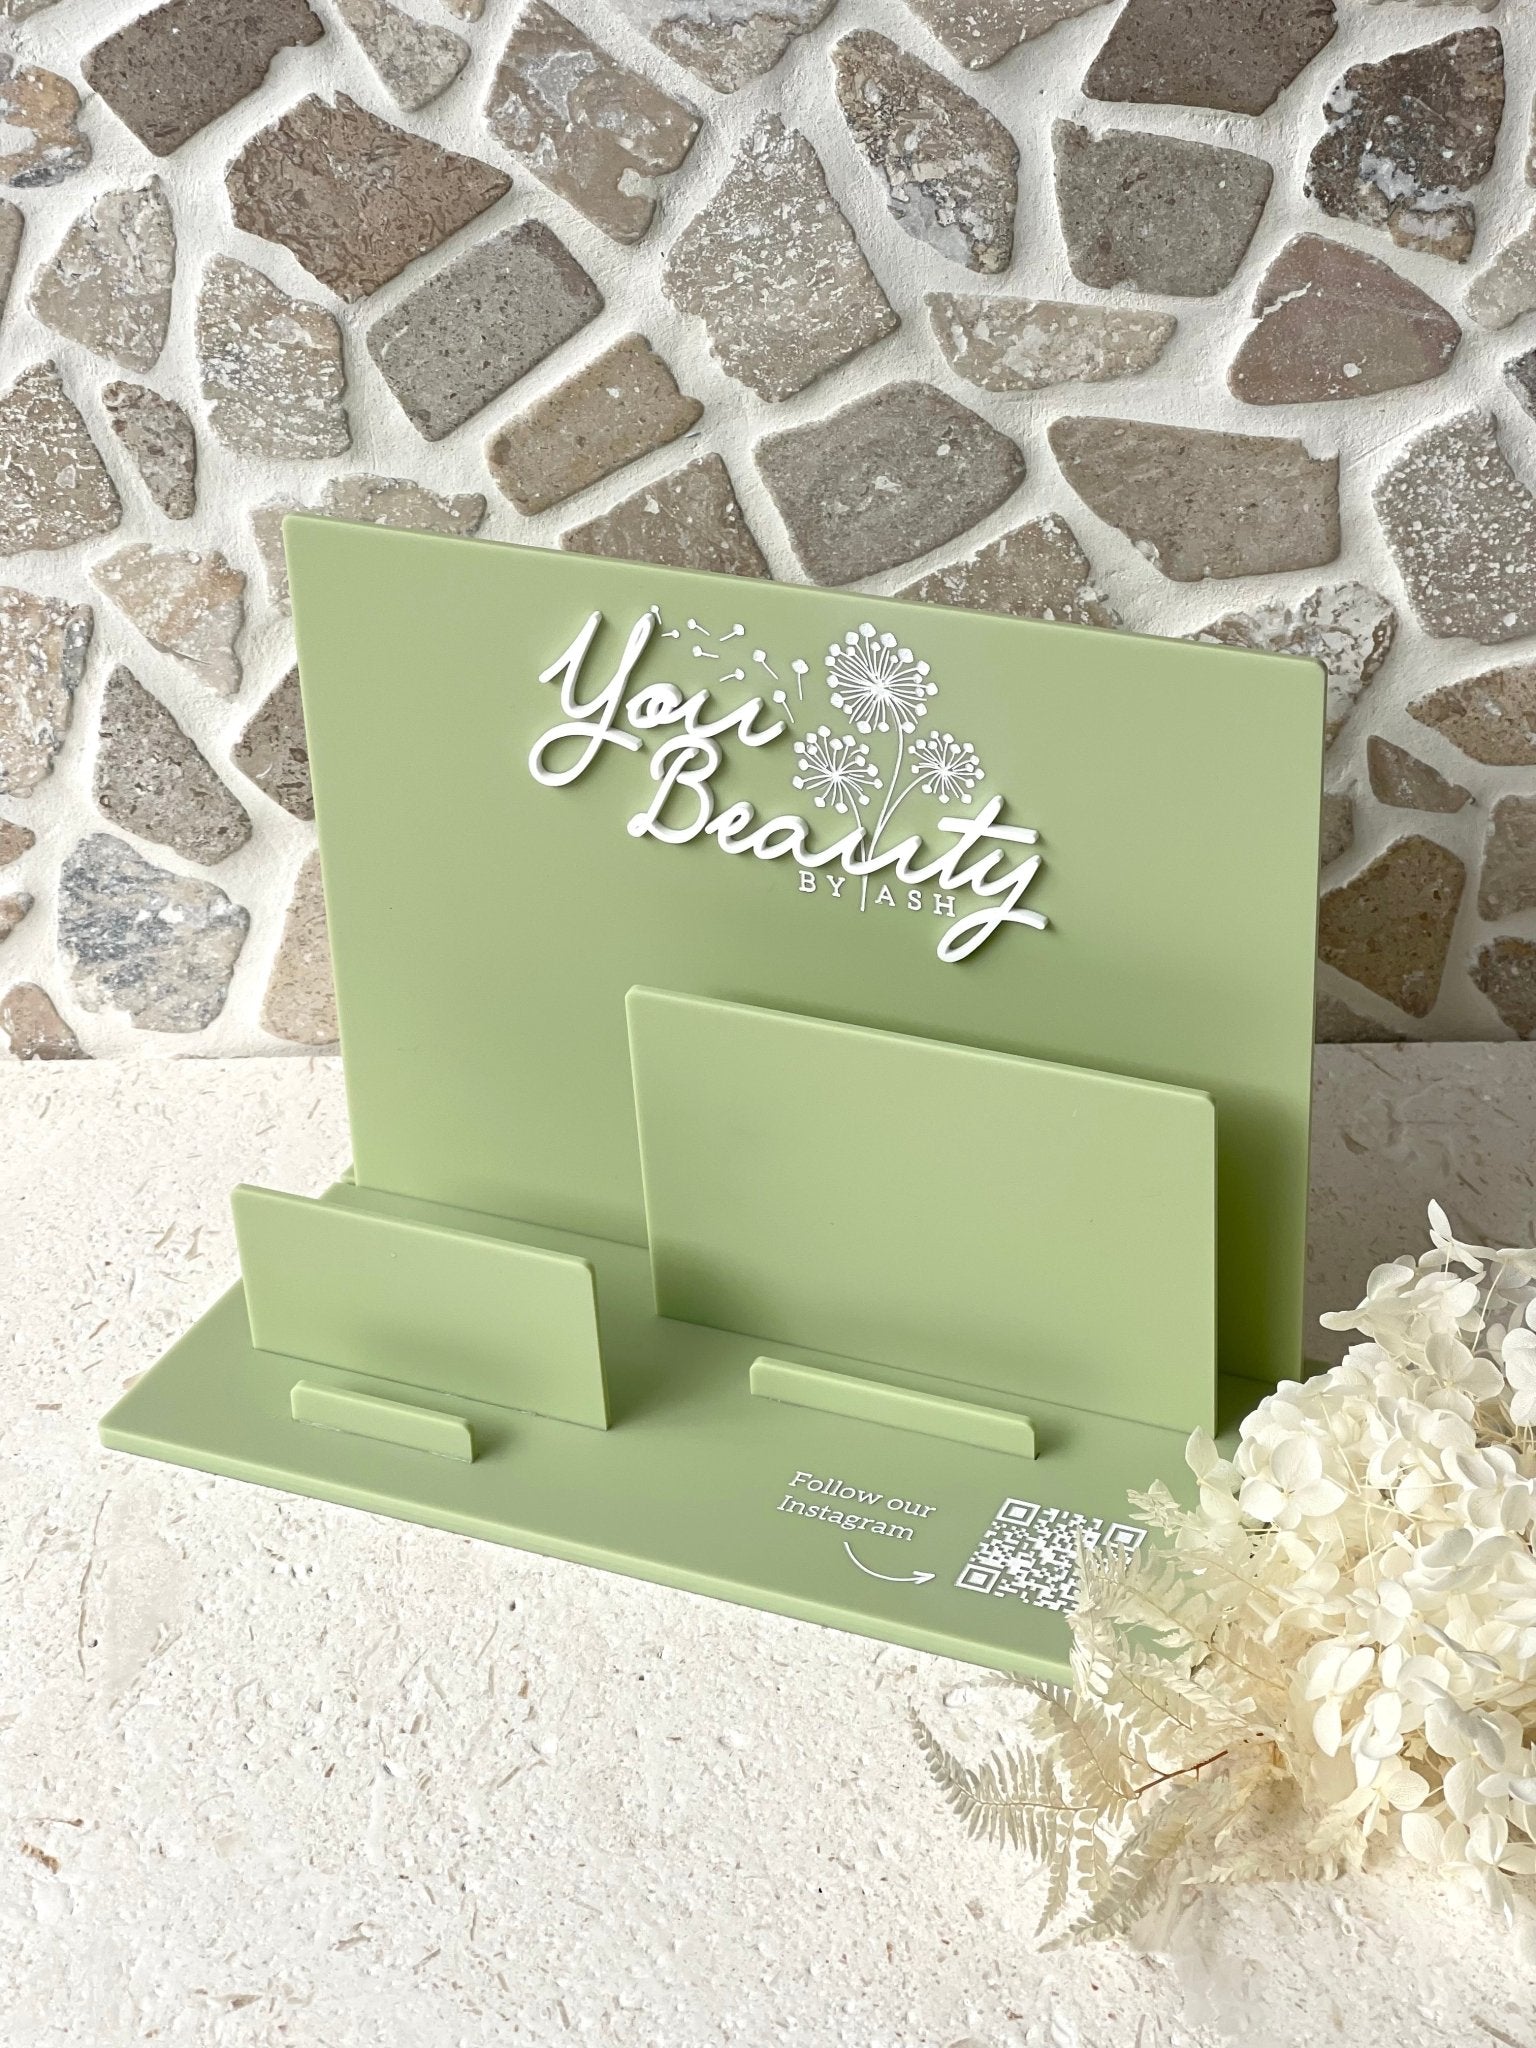 Double Business Card Stand - The Humble Gift Co.